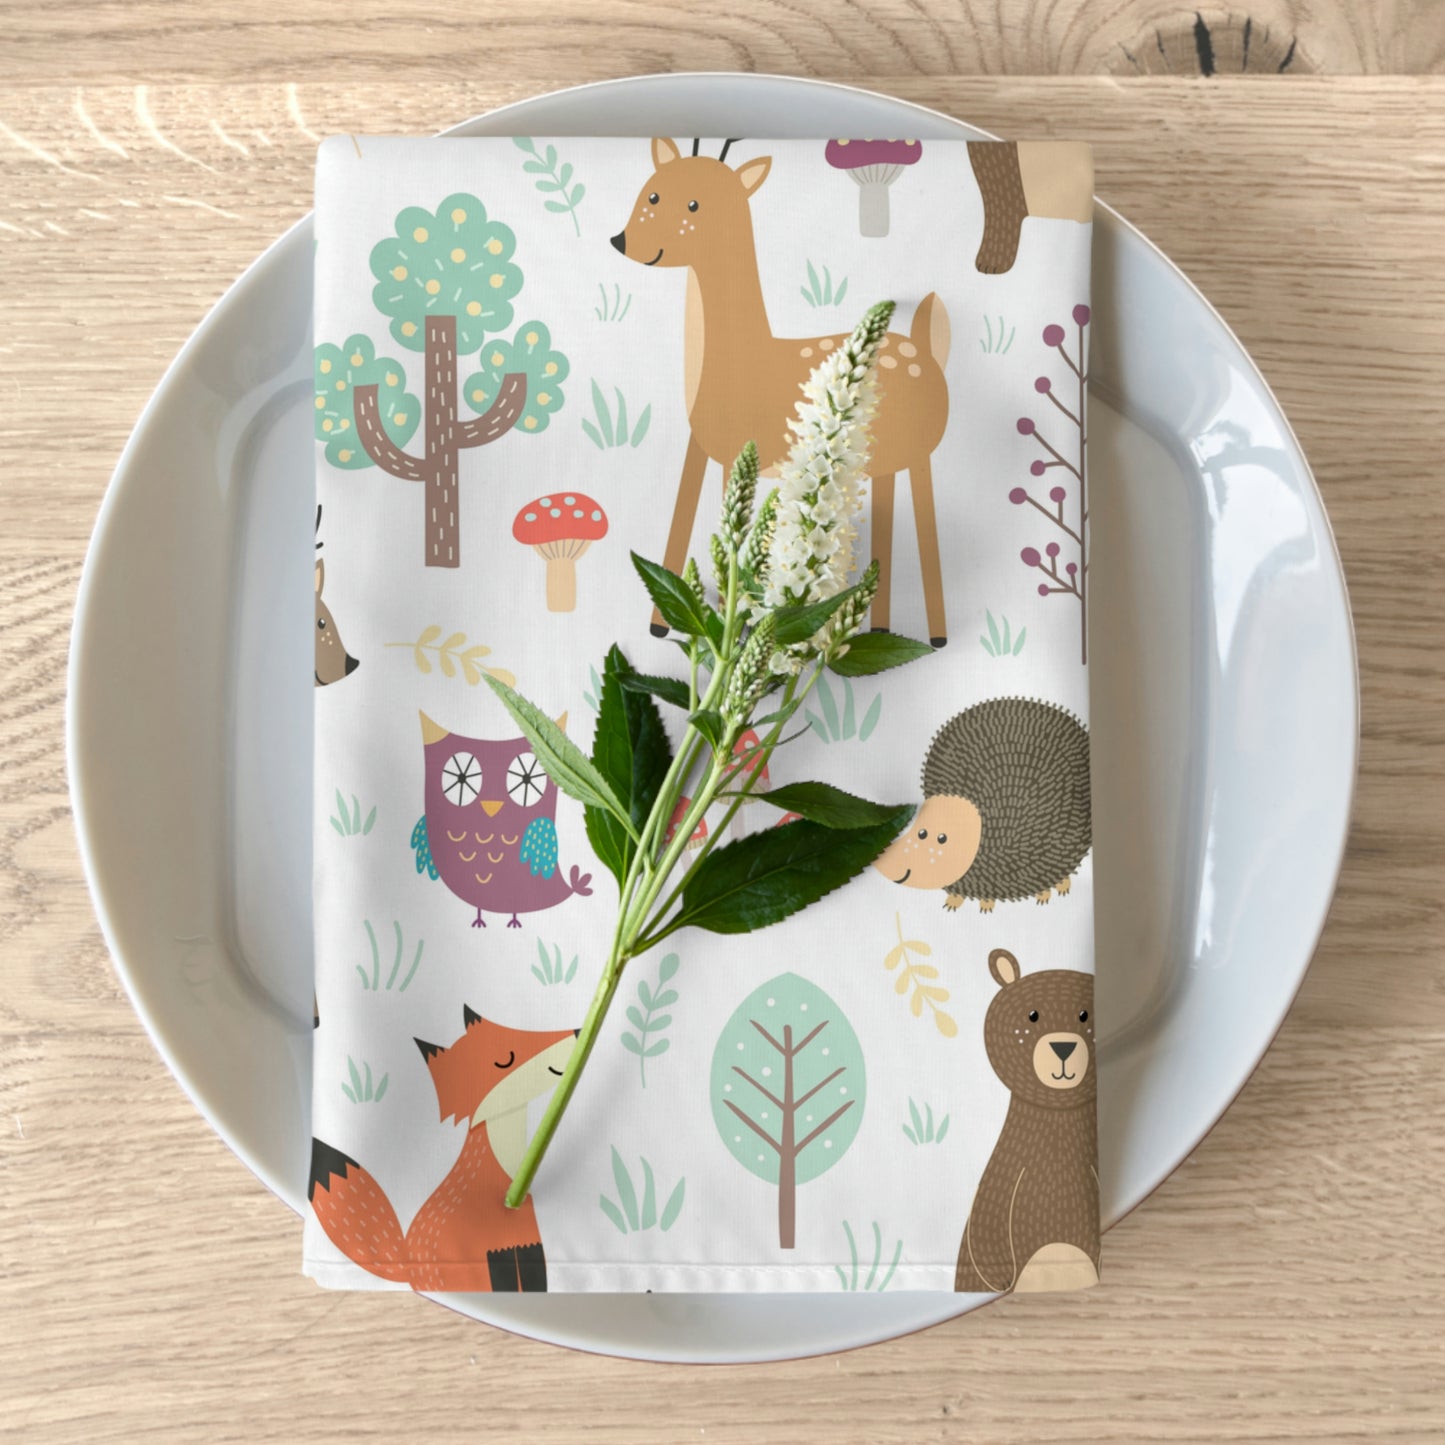 Forest Plants and Animals Napkins Set of 4